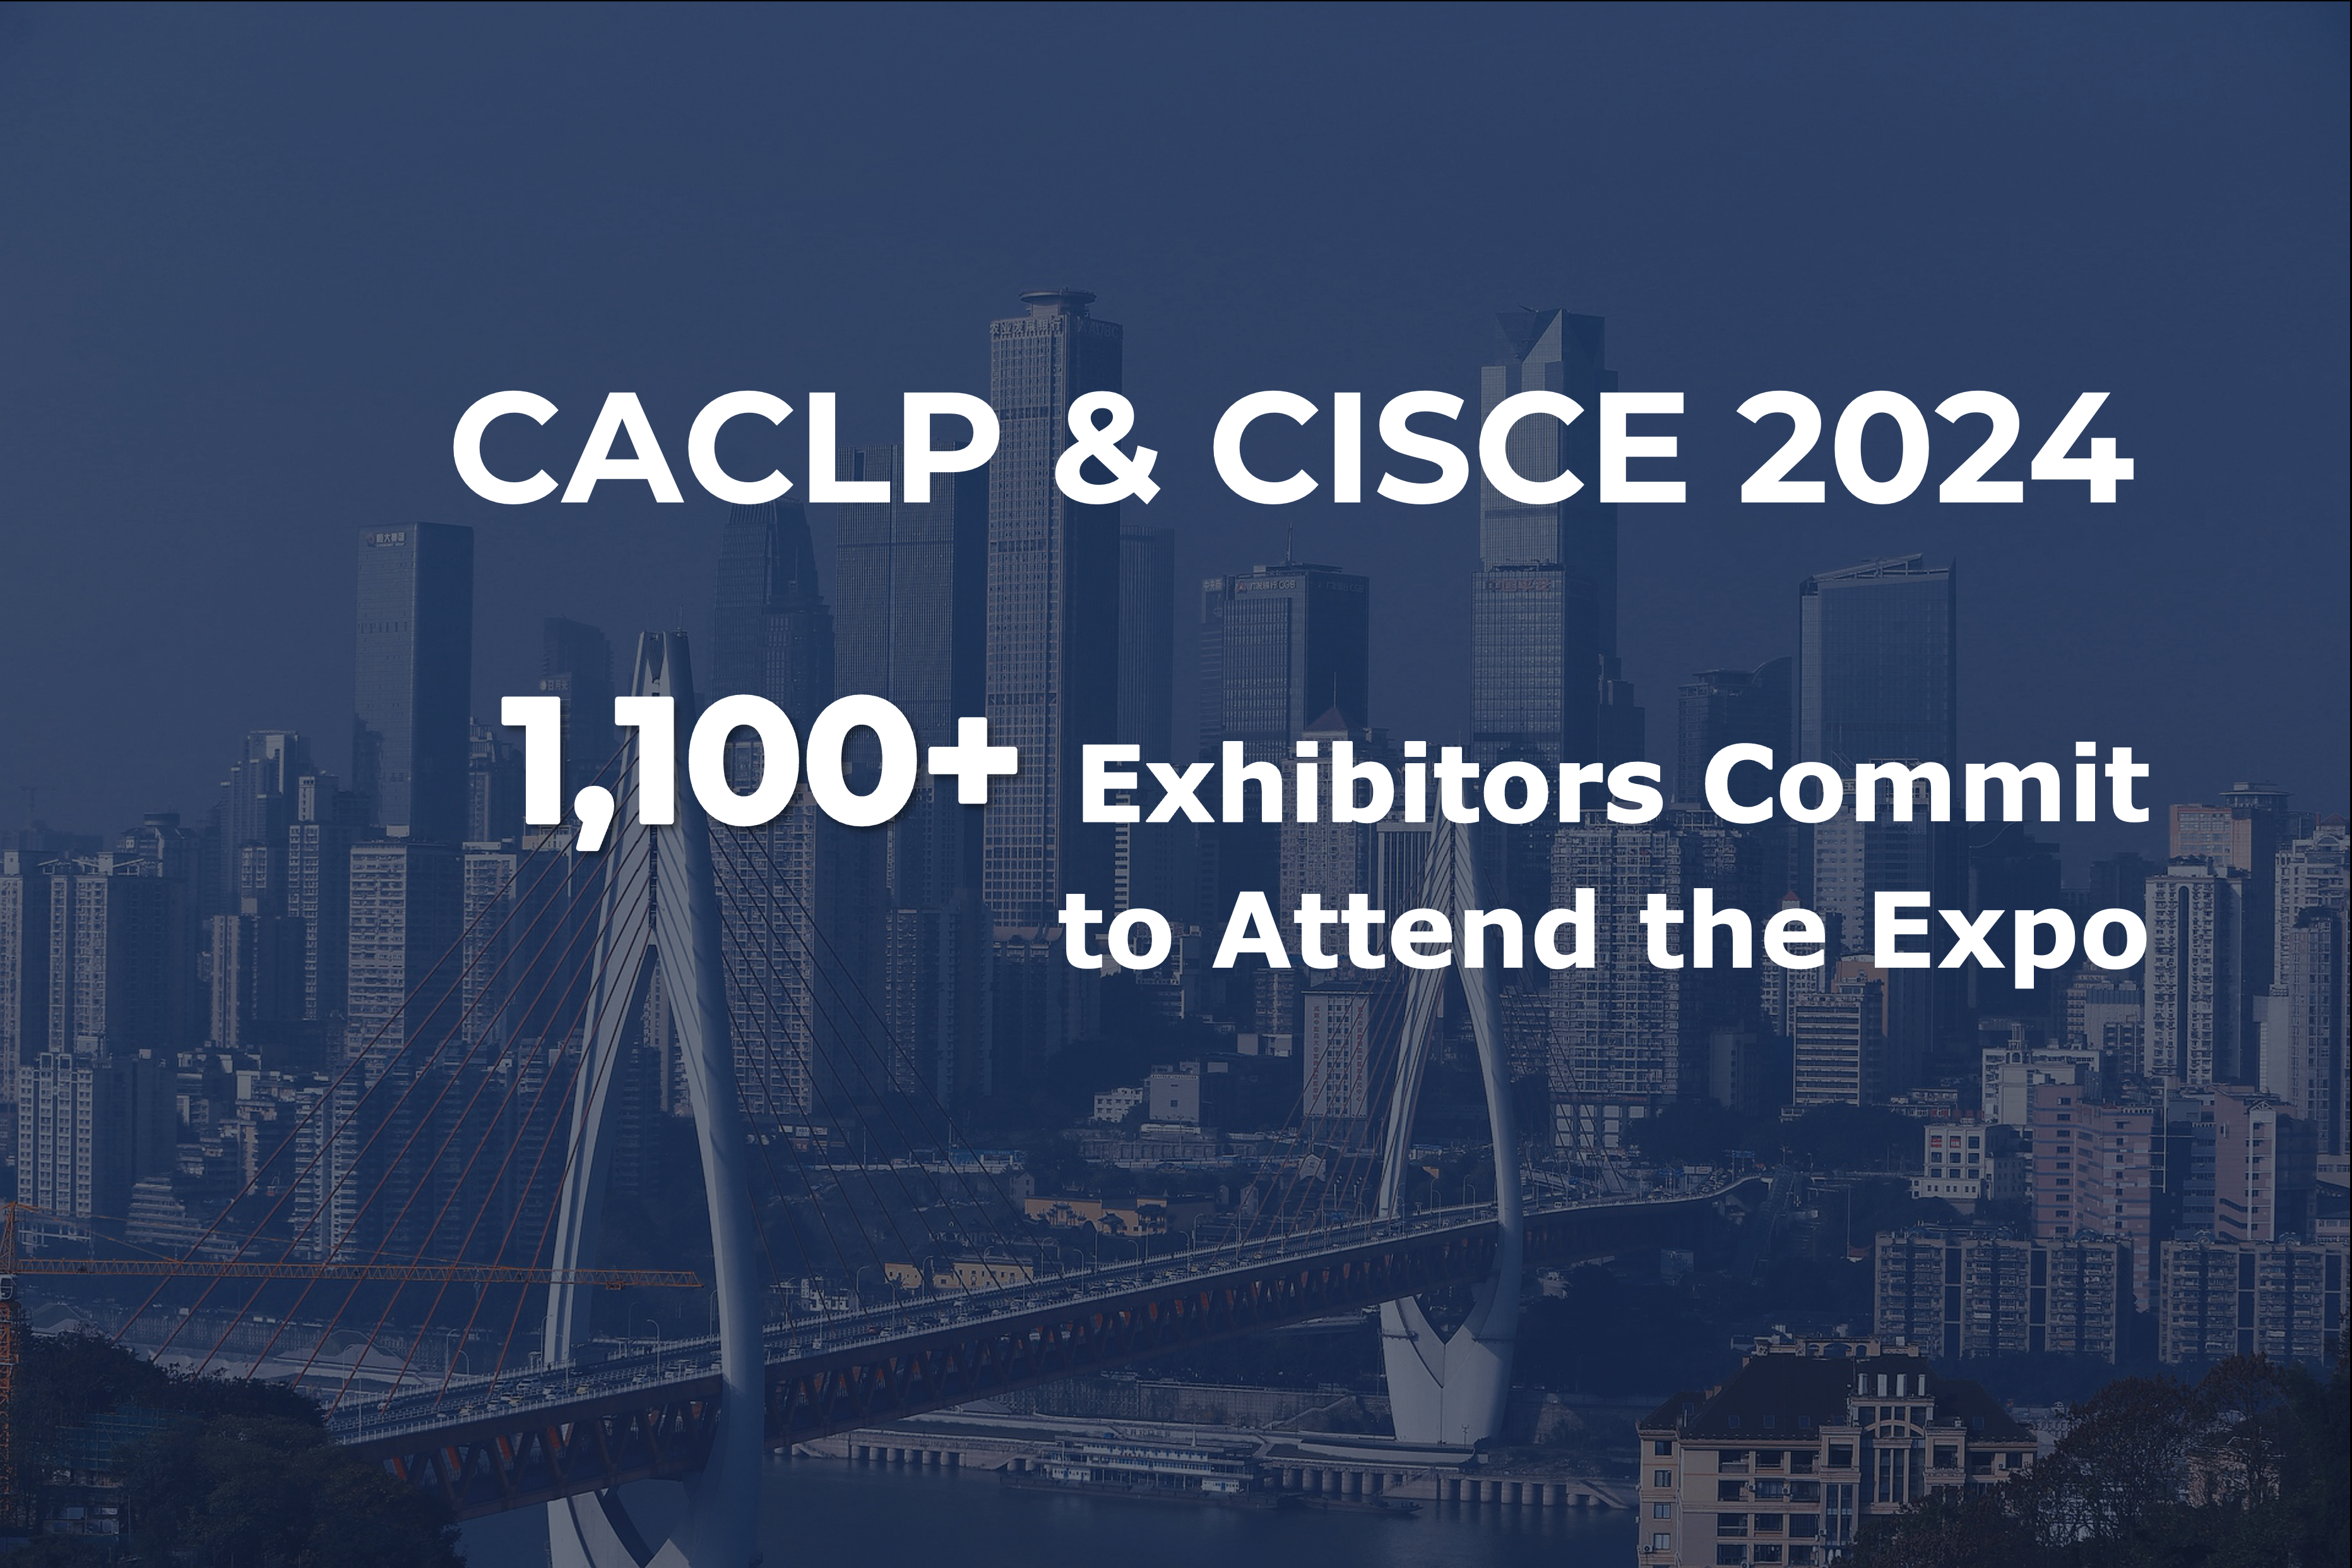 Over 1,100 exhibitors commit to attend the 2024 China Association of Clinical Laboratory Practice Expo (CACLP) and China IVD Supply Chain Expo (CISCE)